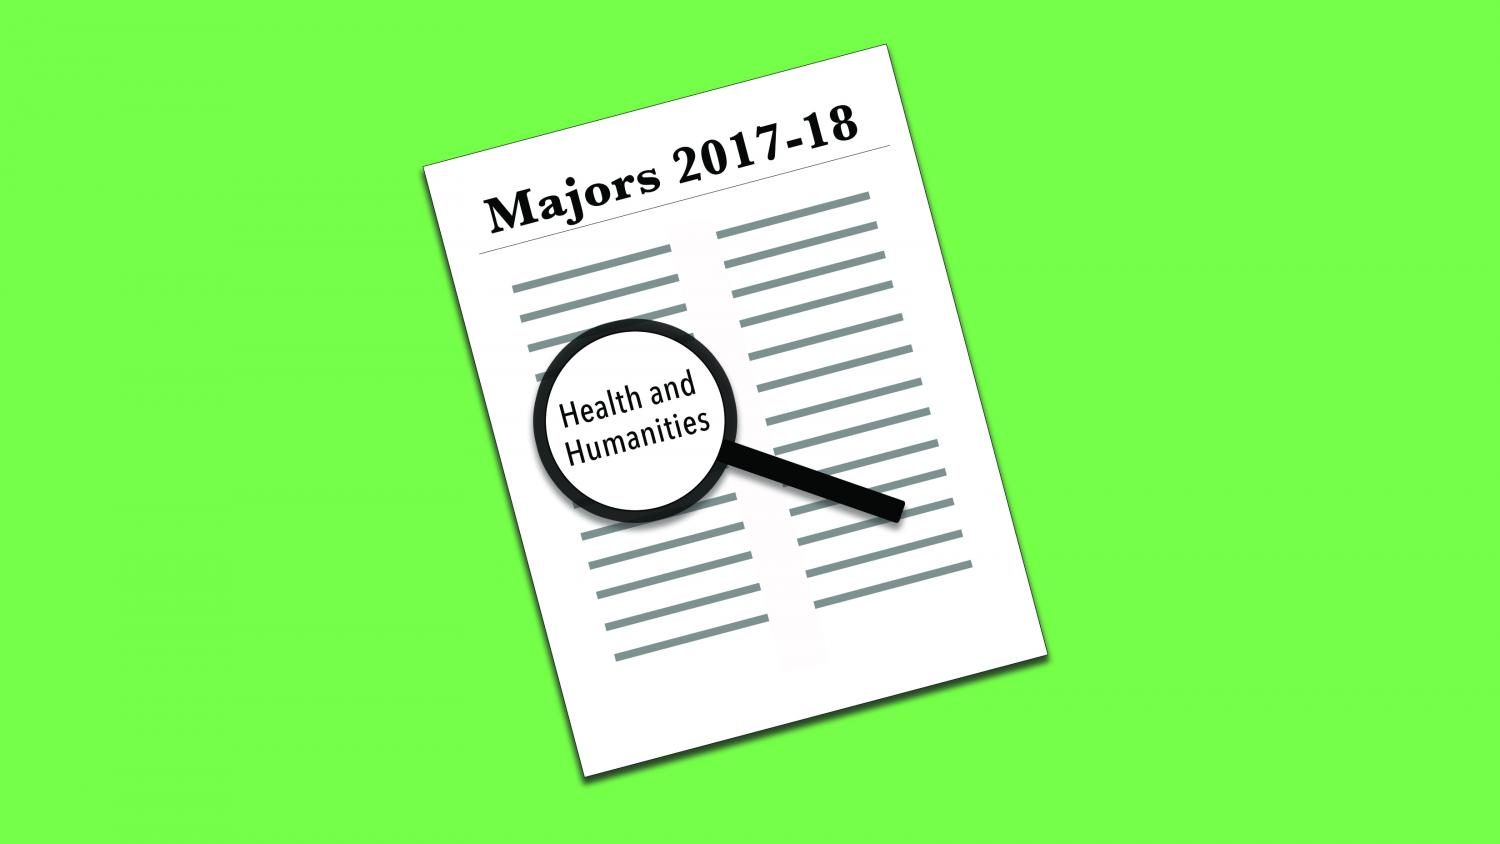 Health humanities major added for 2017-18